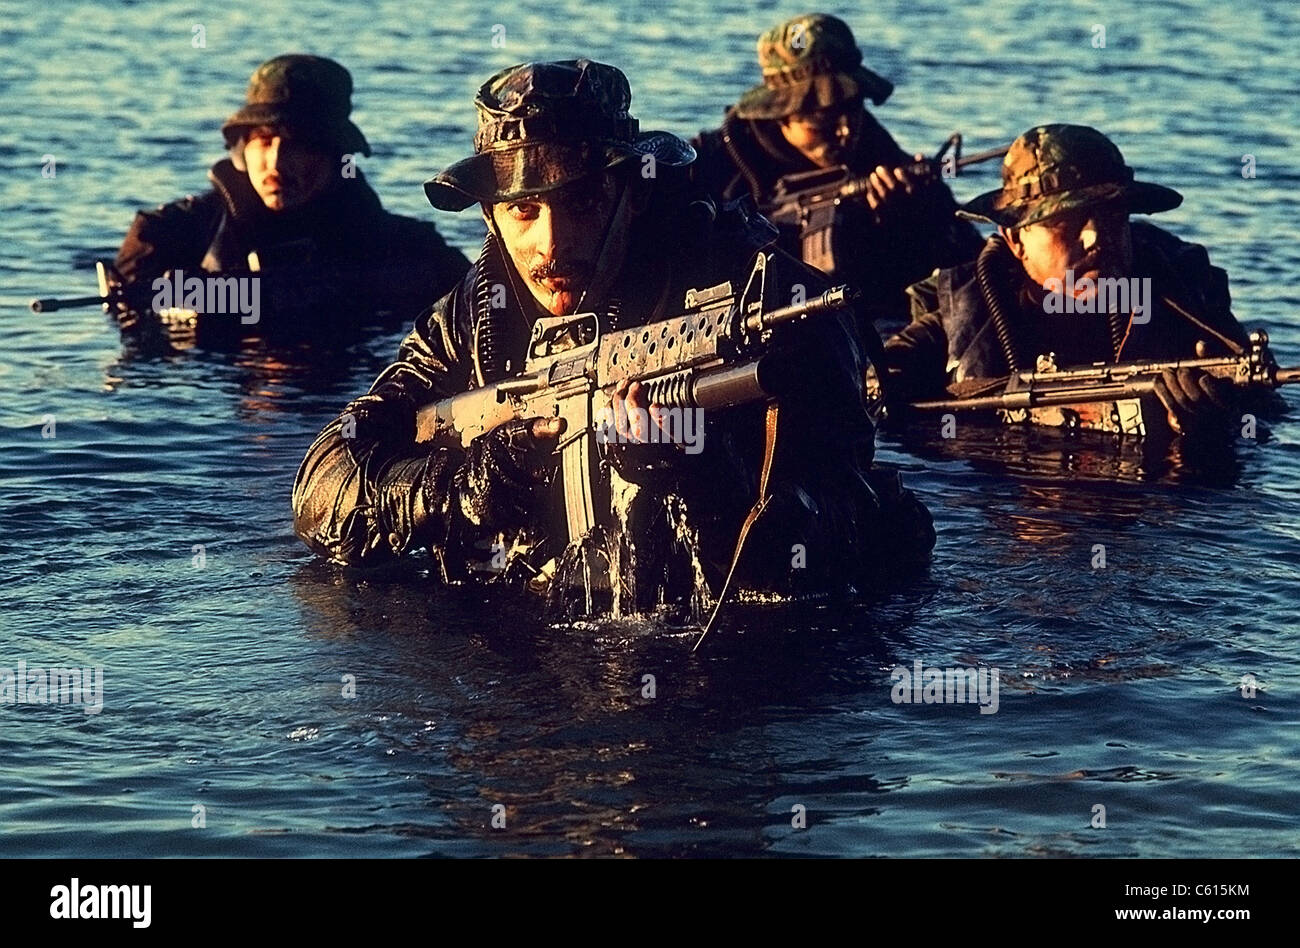 US Navy SEAL team emerges from water during warfare training. Foreground SEAL is armed with an M-16 rifle equipped with a grenade launcher. Dec. 1 1986. (BSLOC 2011 12 275) Stock Photo